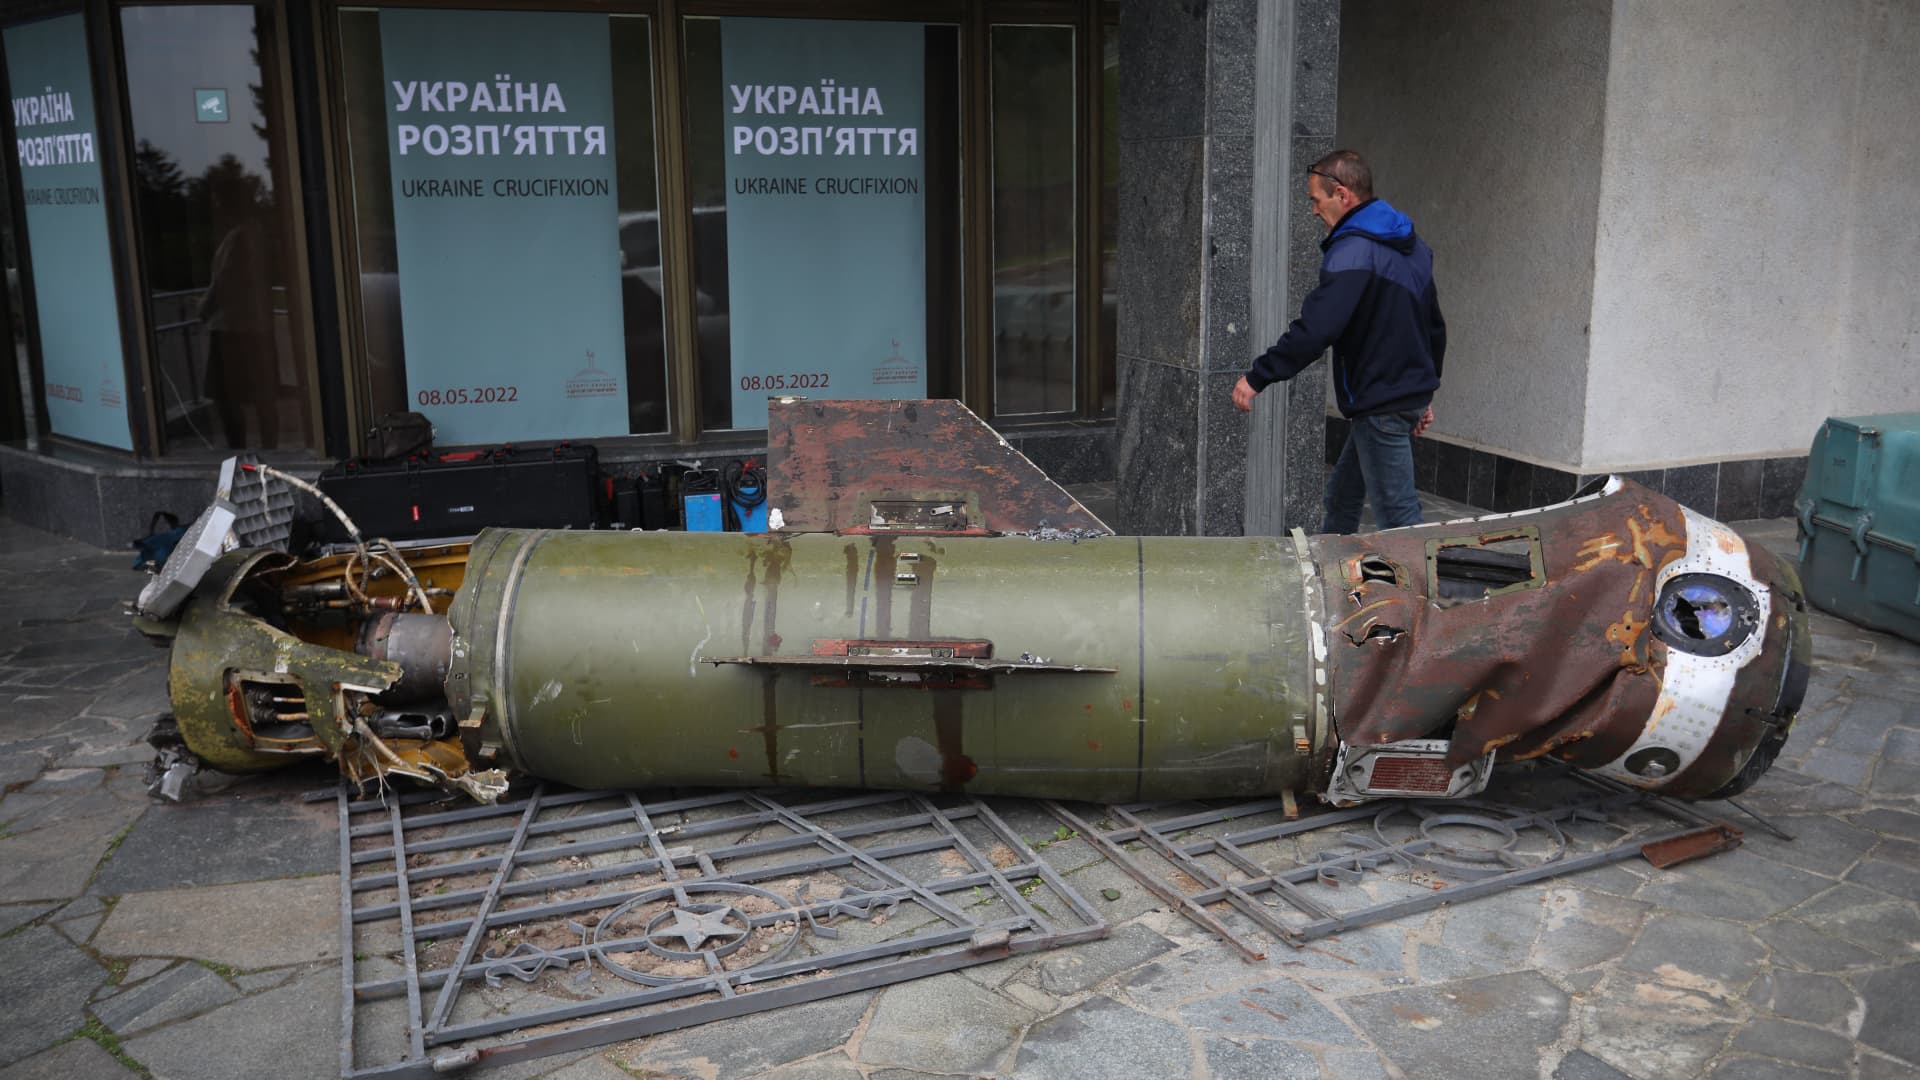 A visitor walks past the remains of a missile from the recent Ukraine Russia conflict, at the entrance to the World War II open-air museum in Kyiv on May 8, 2022, a day before 'Victory Day' is commemorated in Ukraine.